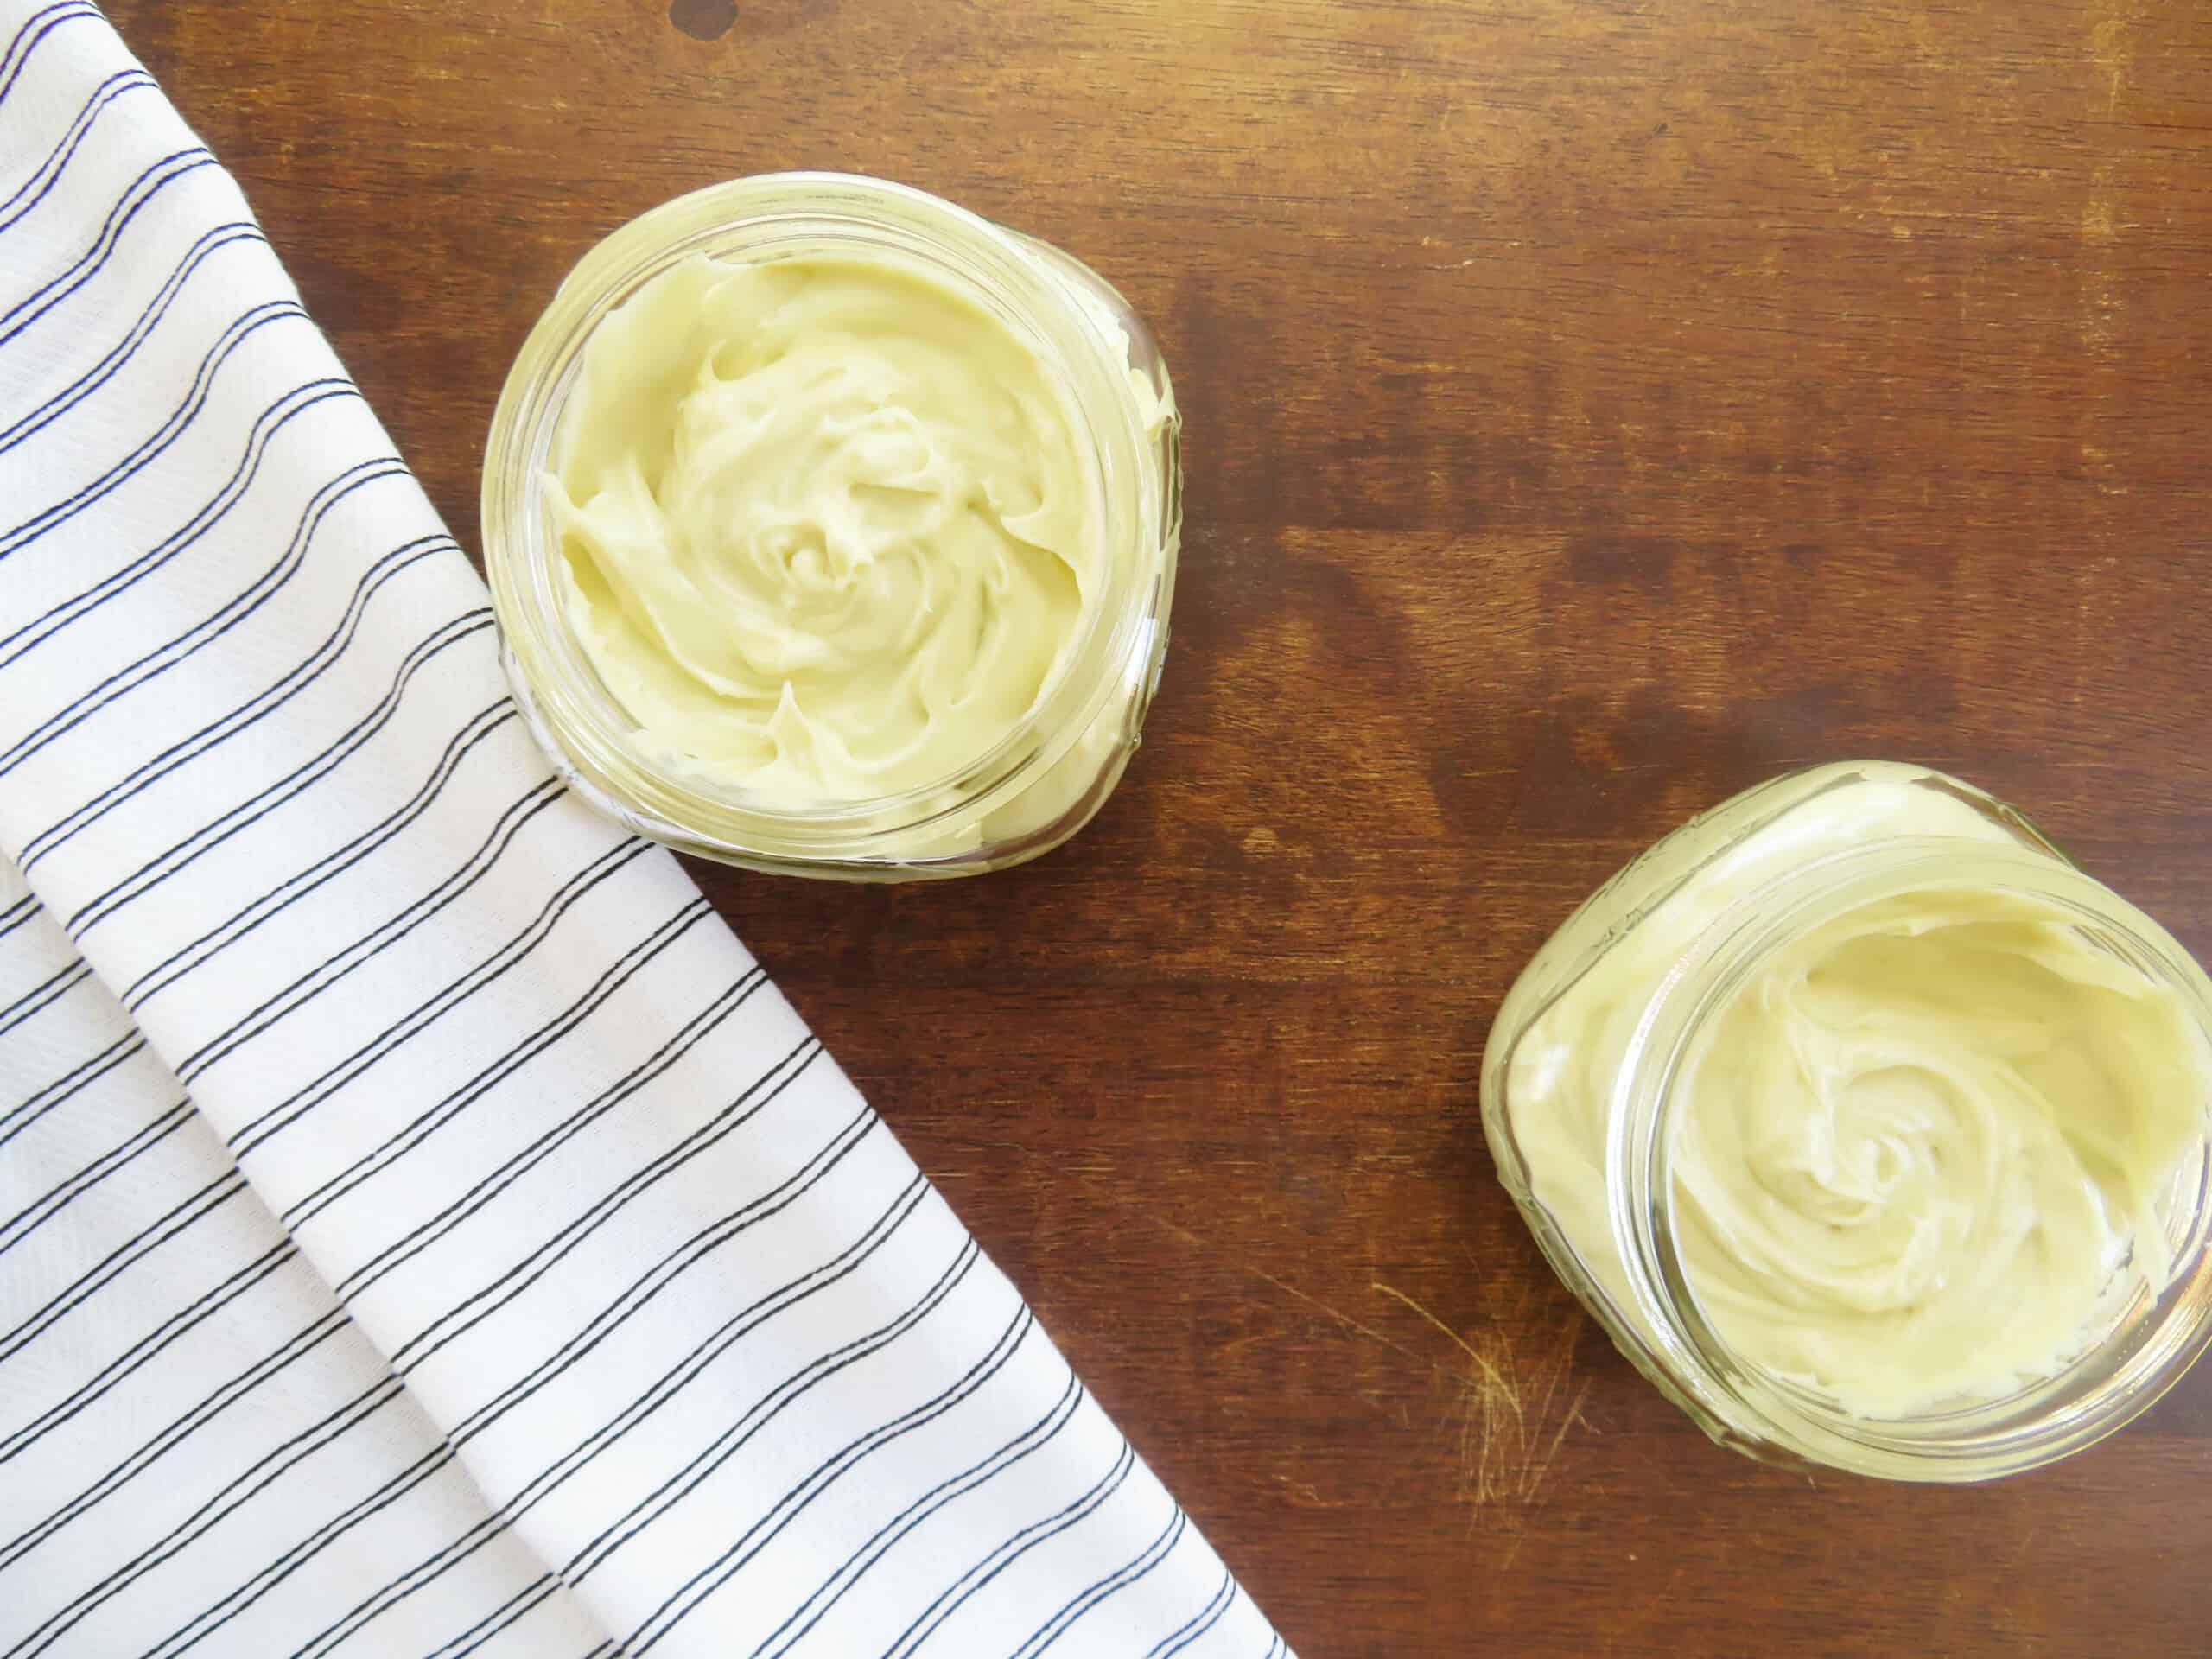 Whipped shea body butter in jars on a table.